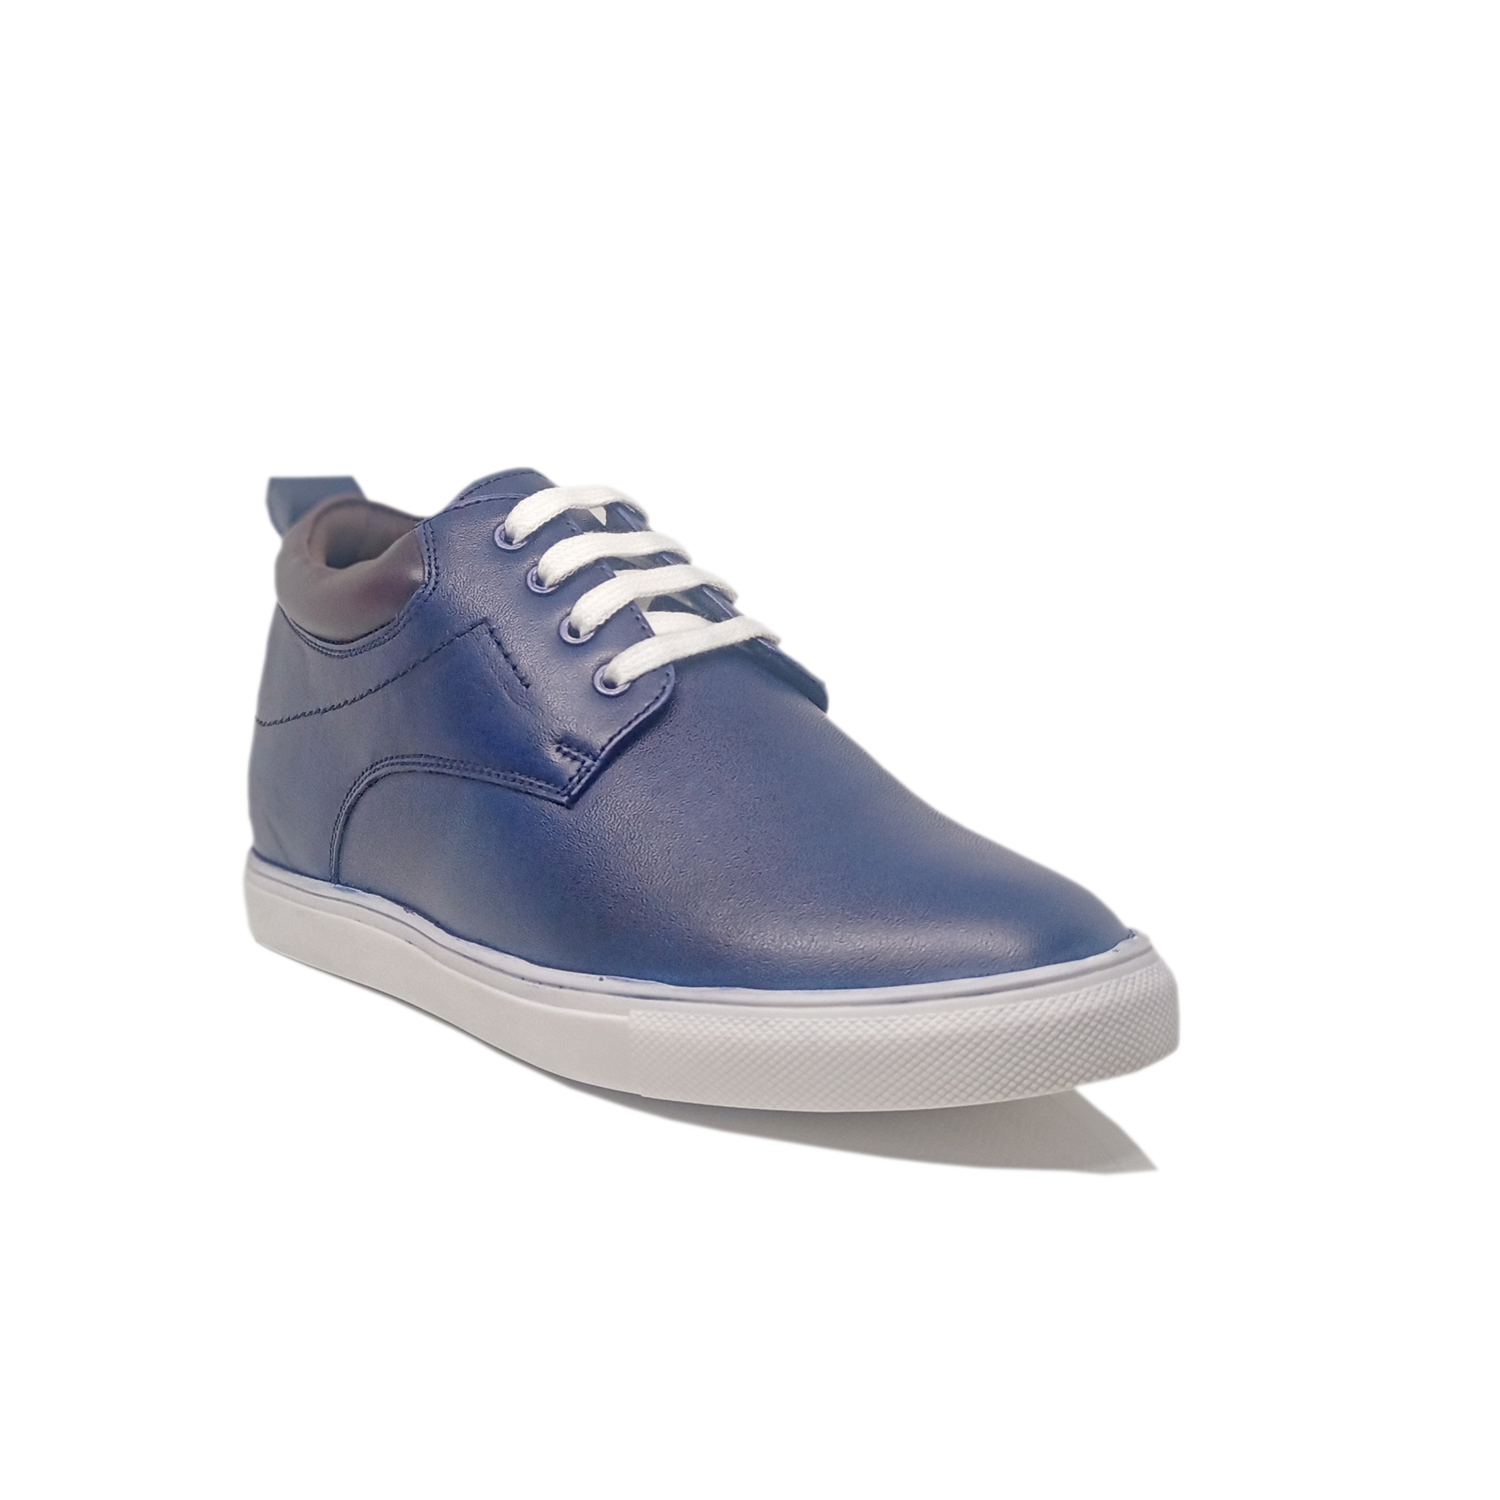 Elevato Height increasing Blue casual leather shoes – 2.6 inches